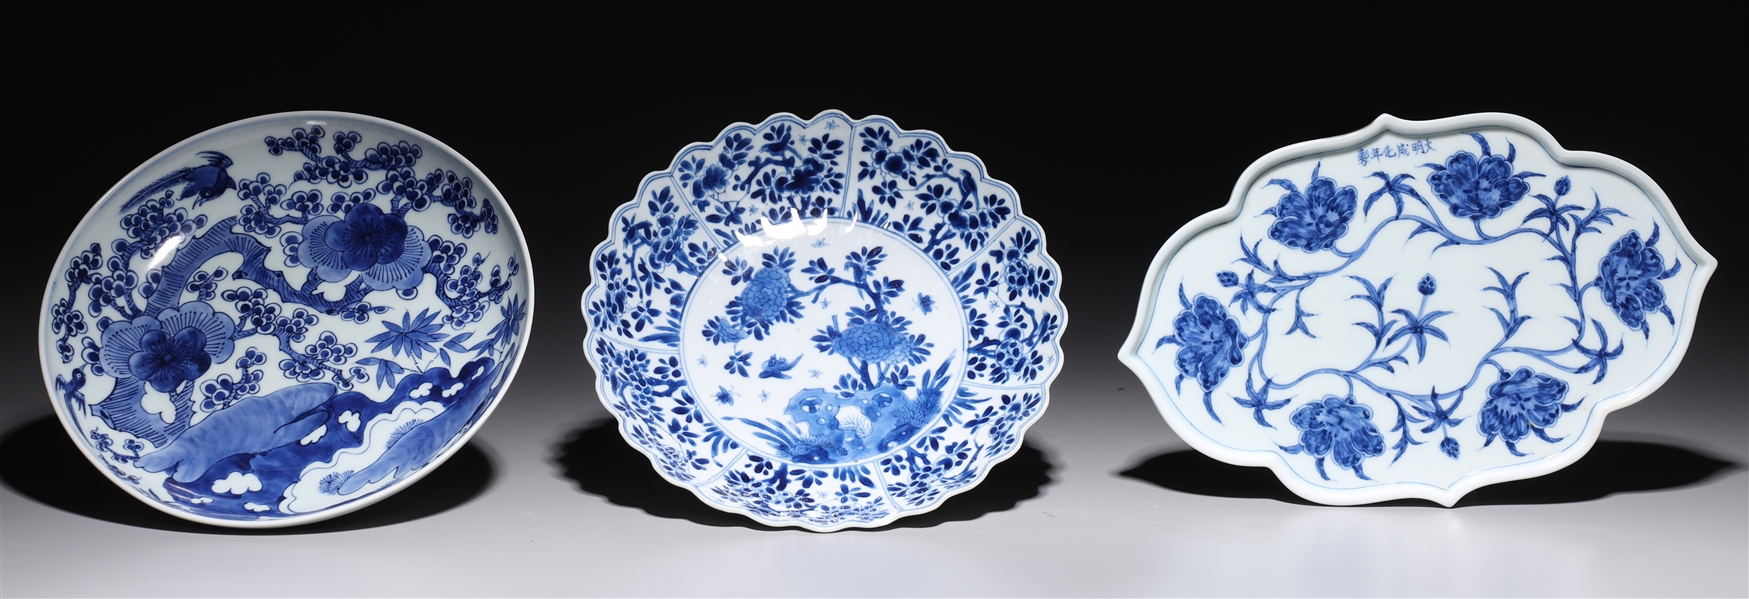 Group of Three Chinese Blue & White porcelains